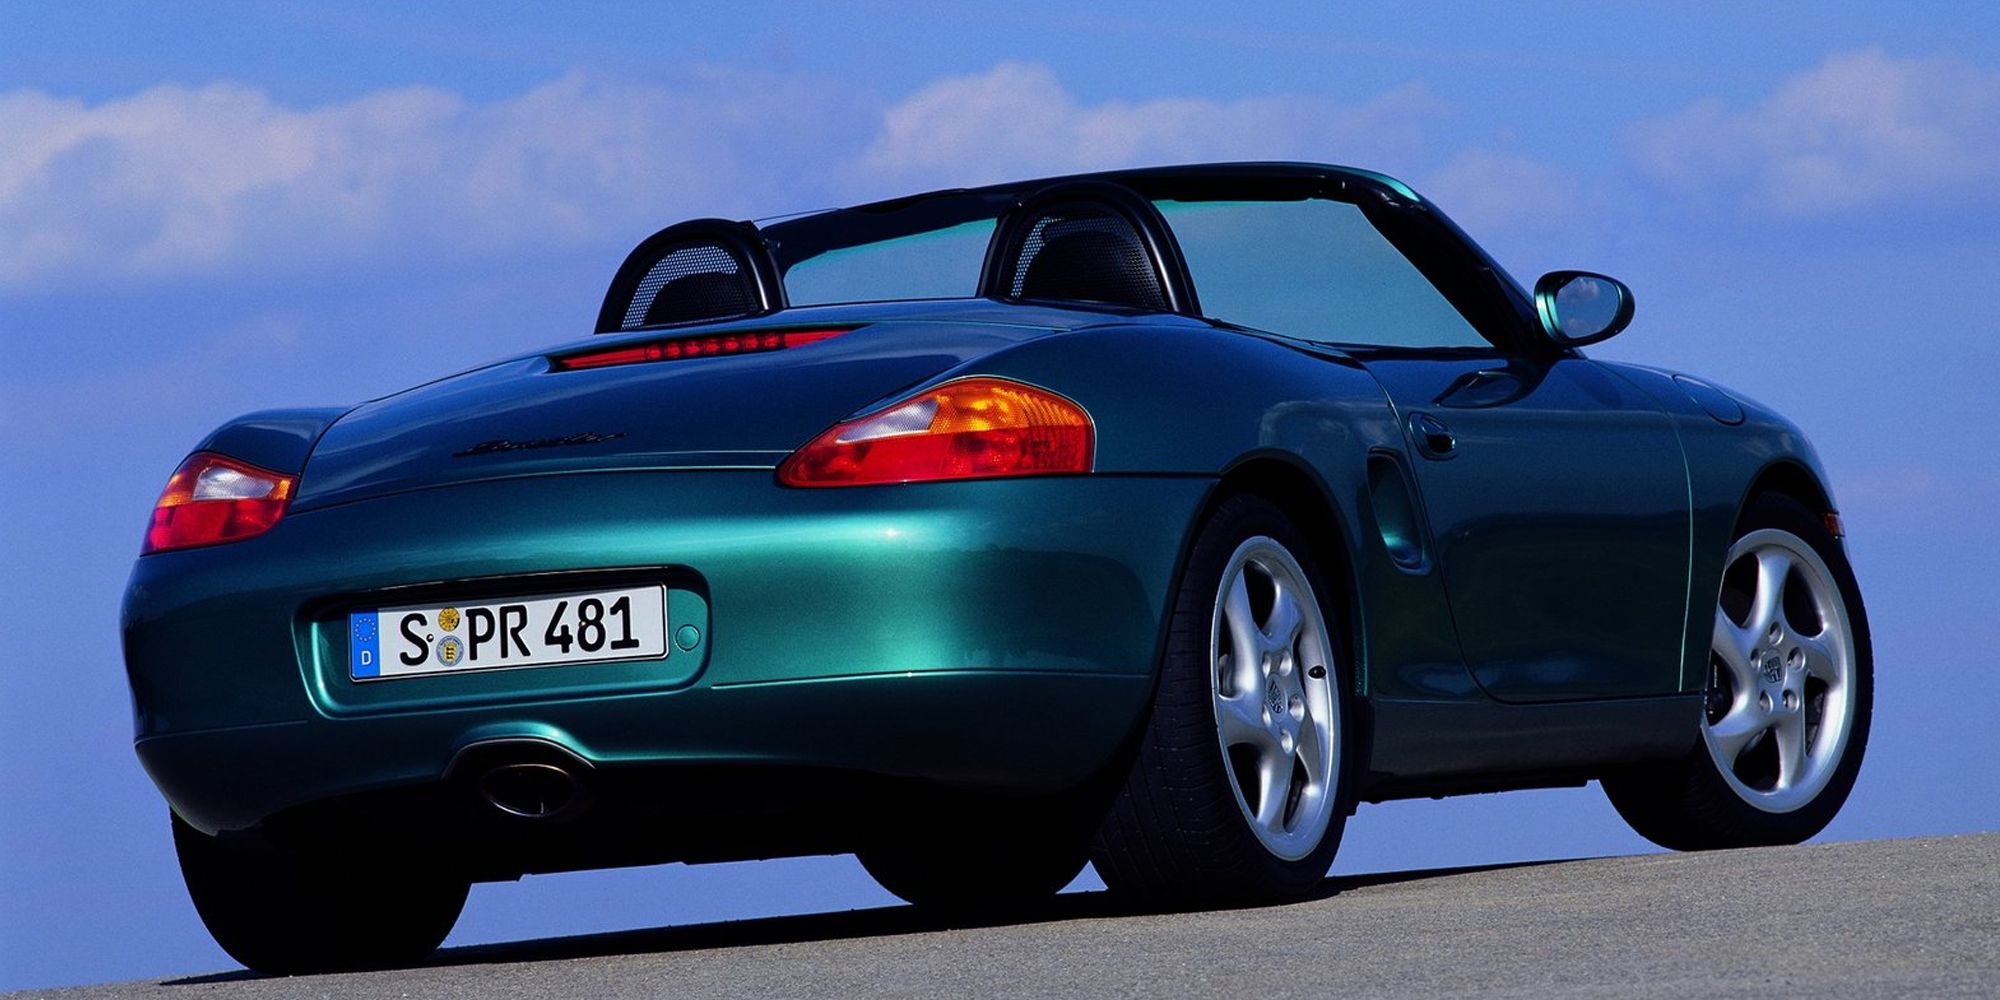 The rear of a green Boxster